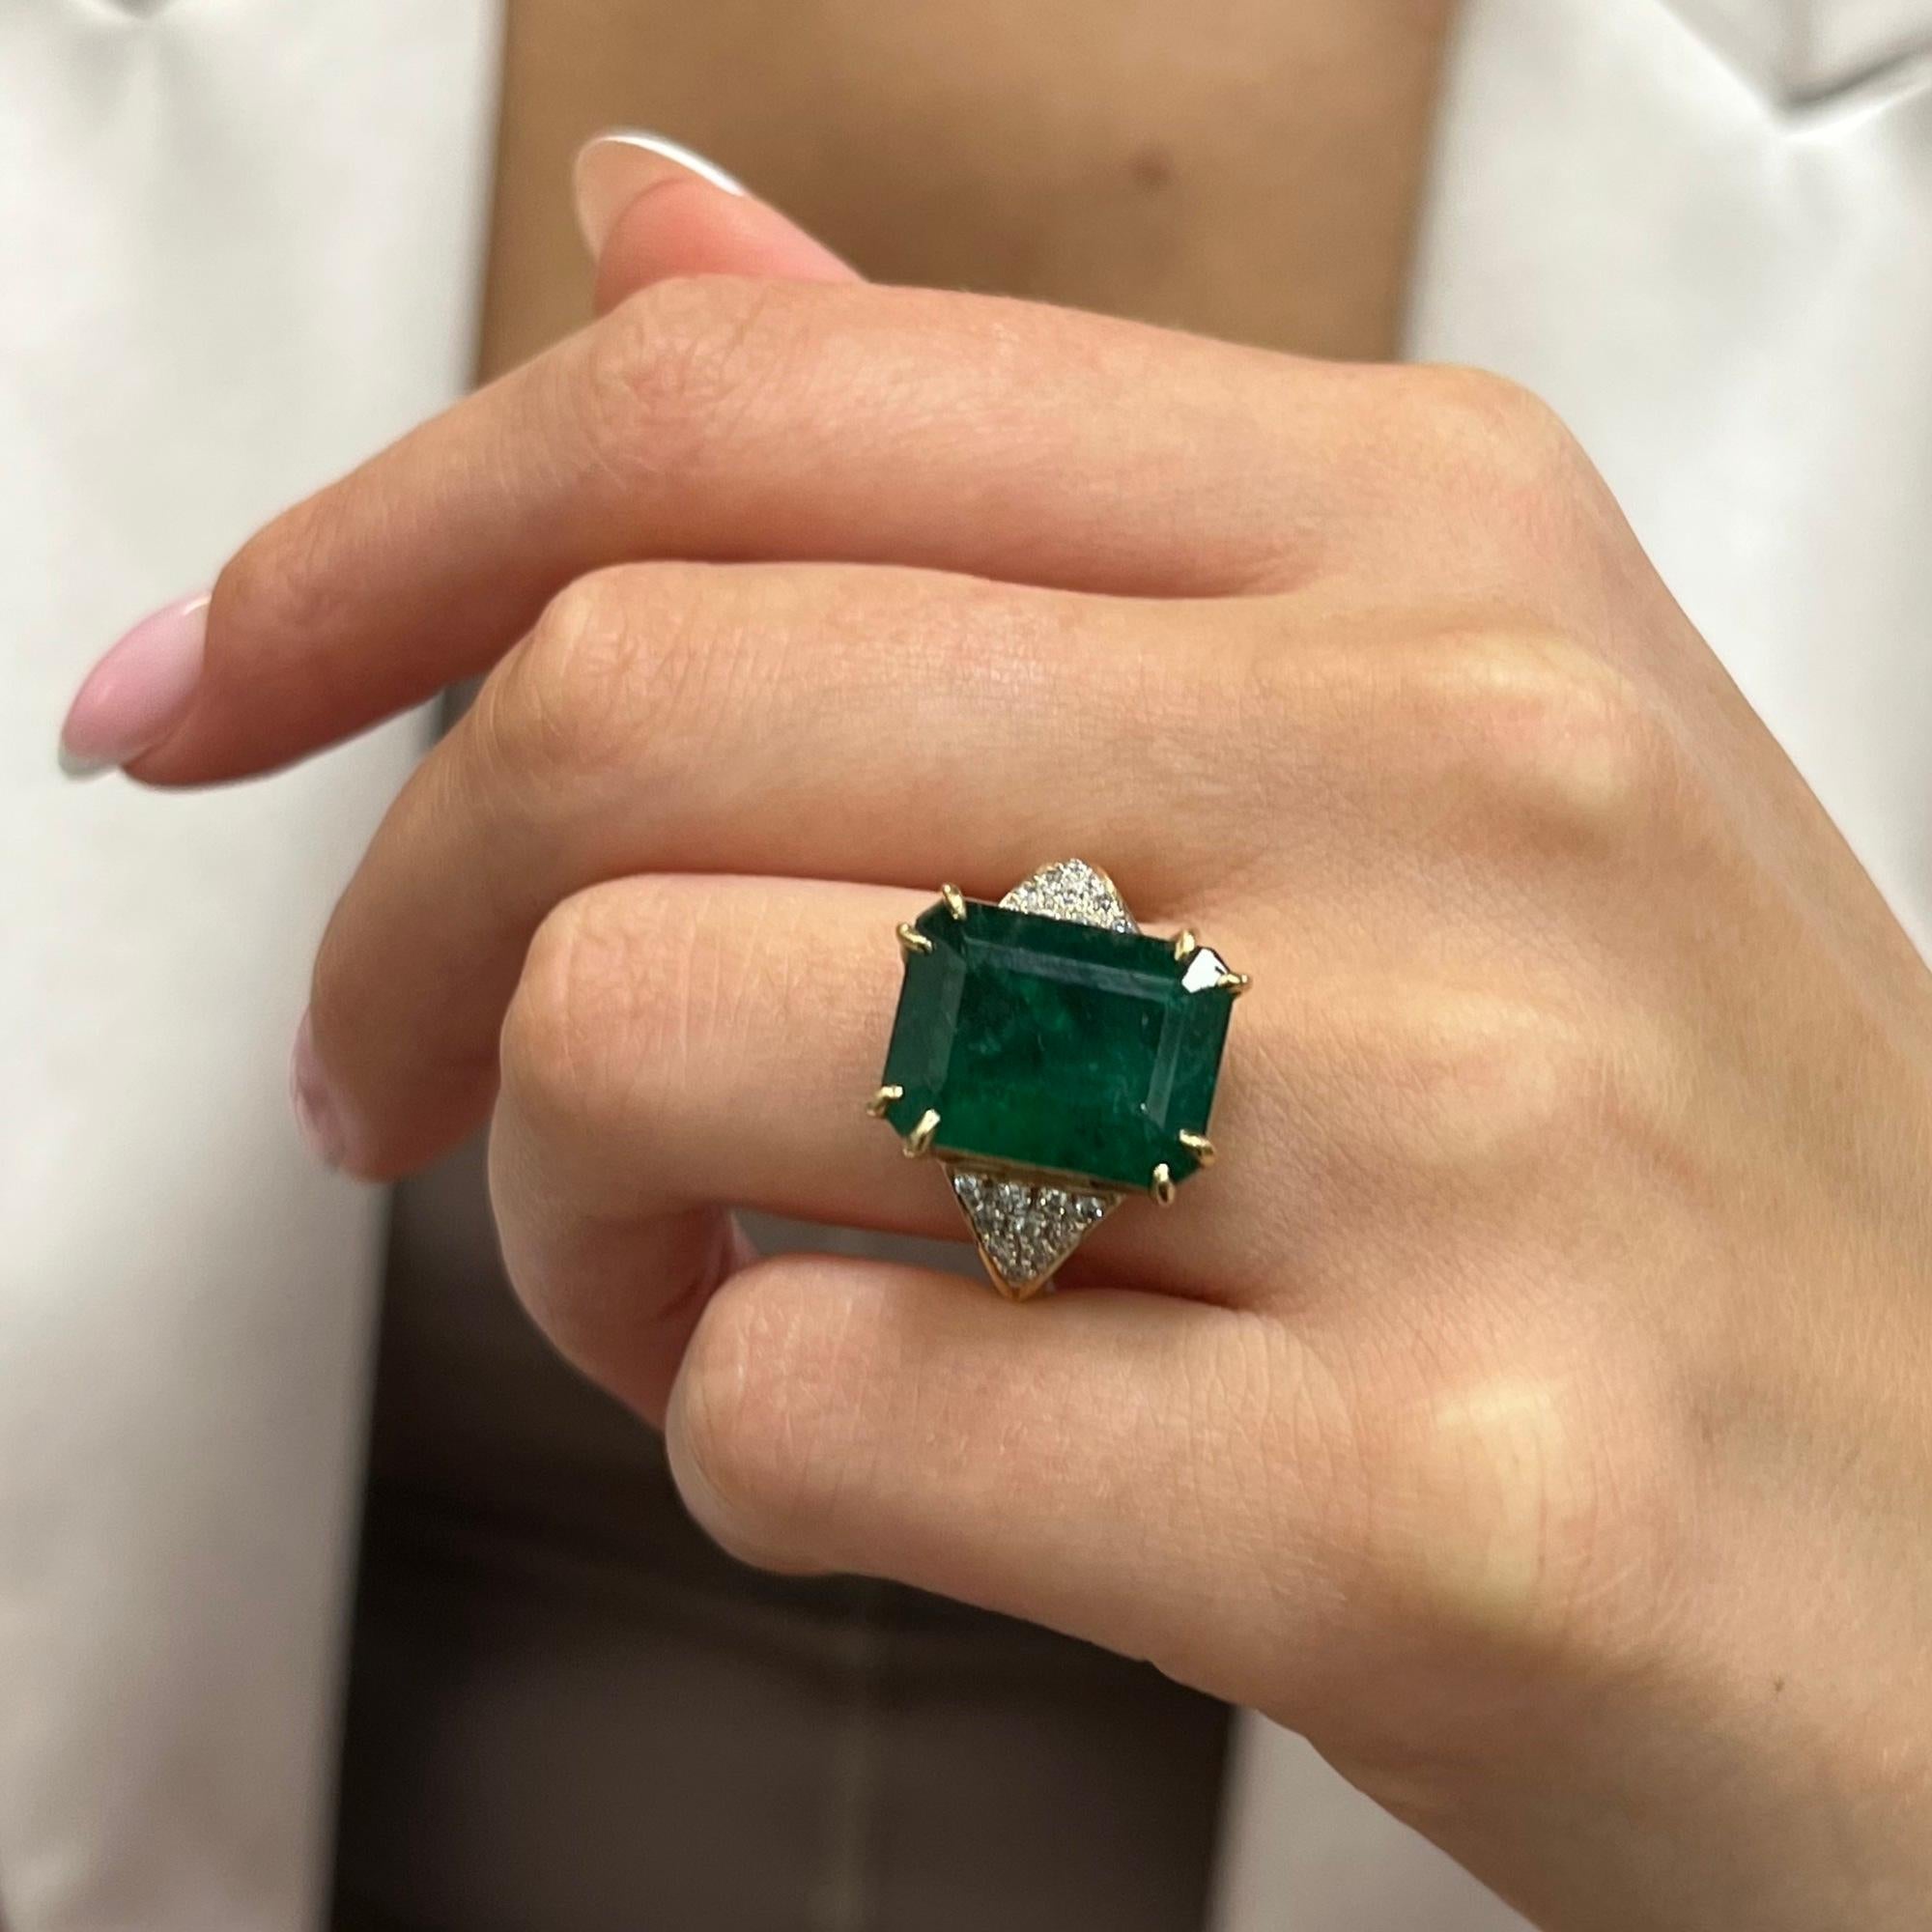 Rachel Koen 11.06Cttw Emerald & 0.20Cttw Diamond Cocktail Ring 18K Yellow Gold In Excellent Condition For Sale In New York, NY